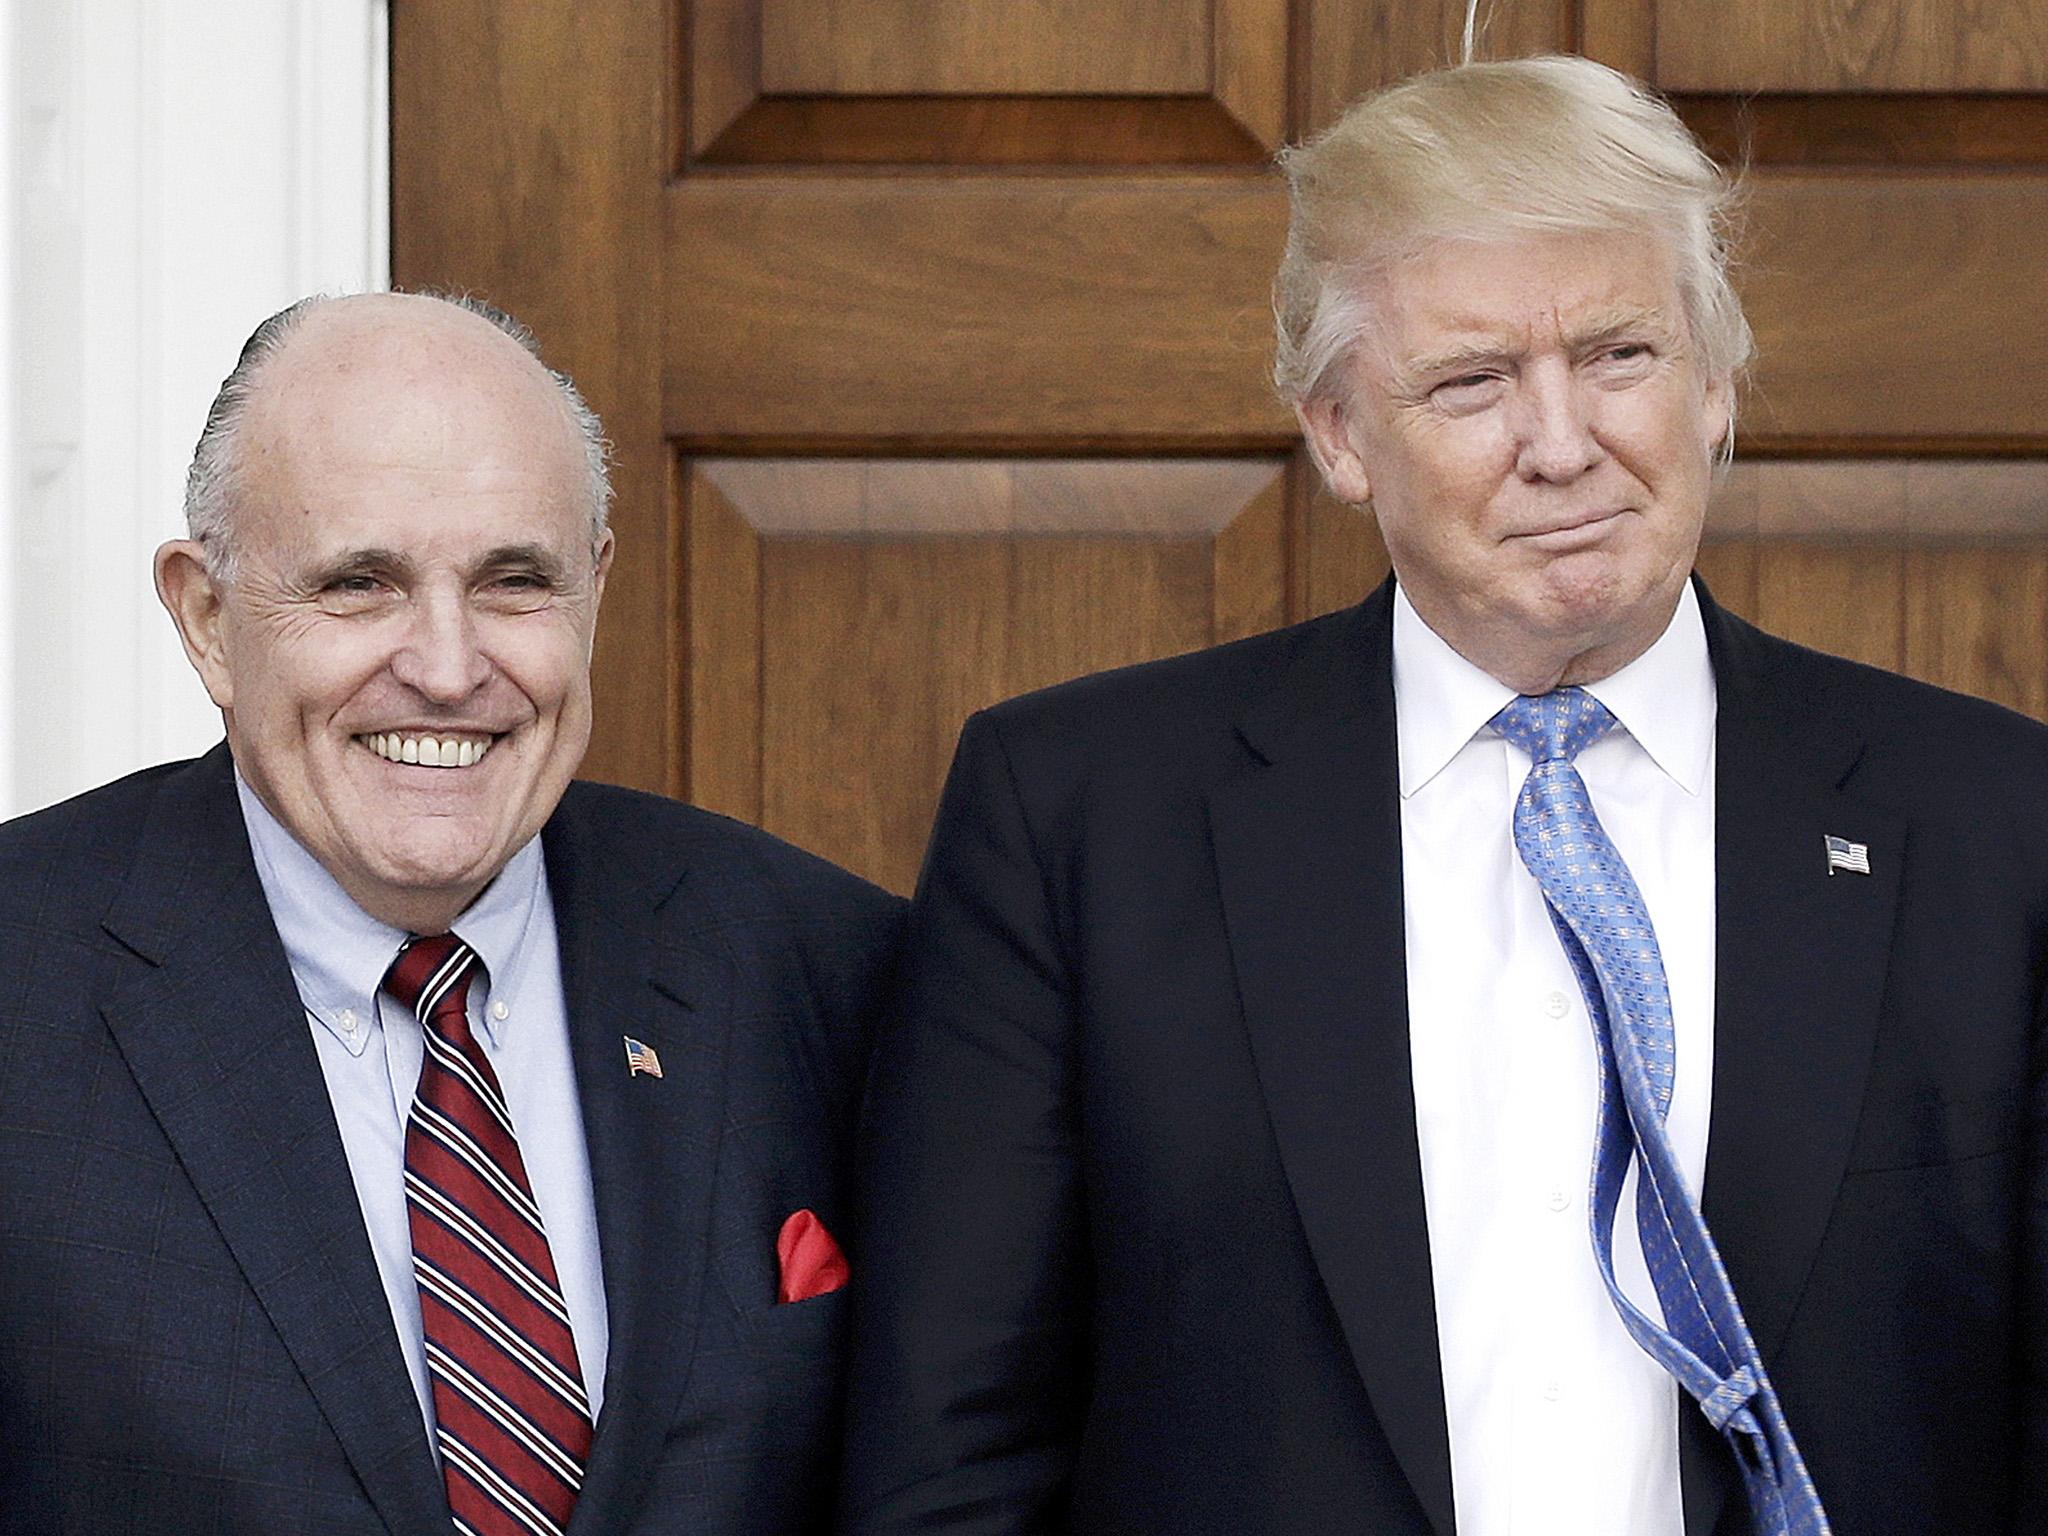 Former New York City Mayor Rudy Giuliani poses with President Trump at the clubhouse of Trump International Golf Club in New Jersey in 2016. EPA/PETER FOLEY